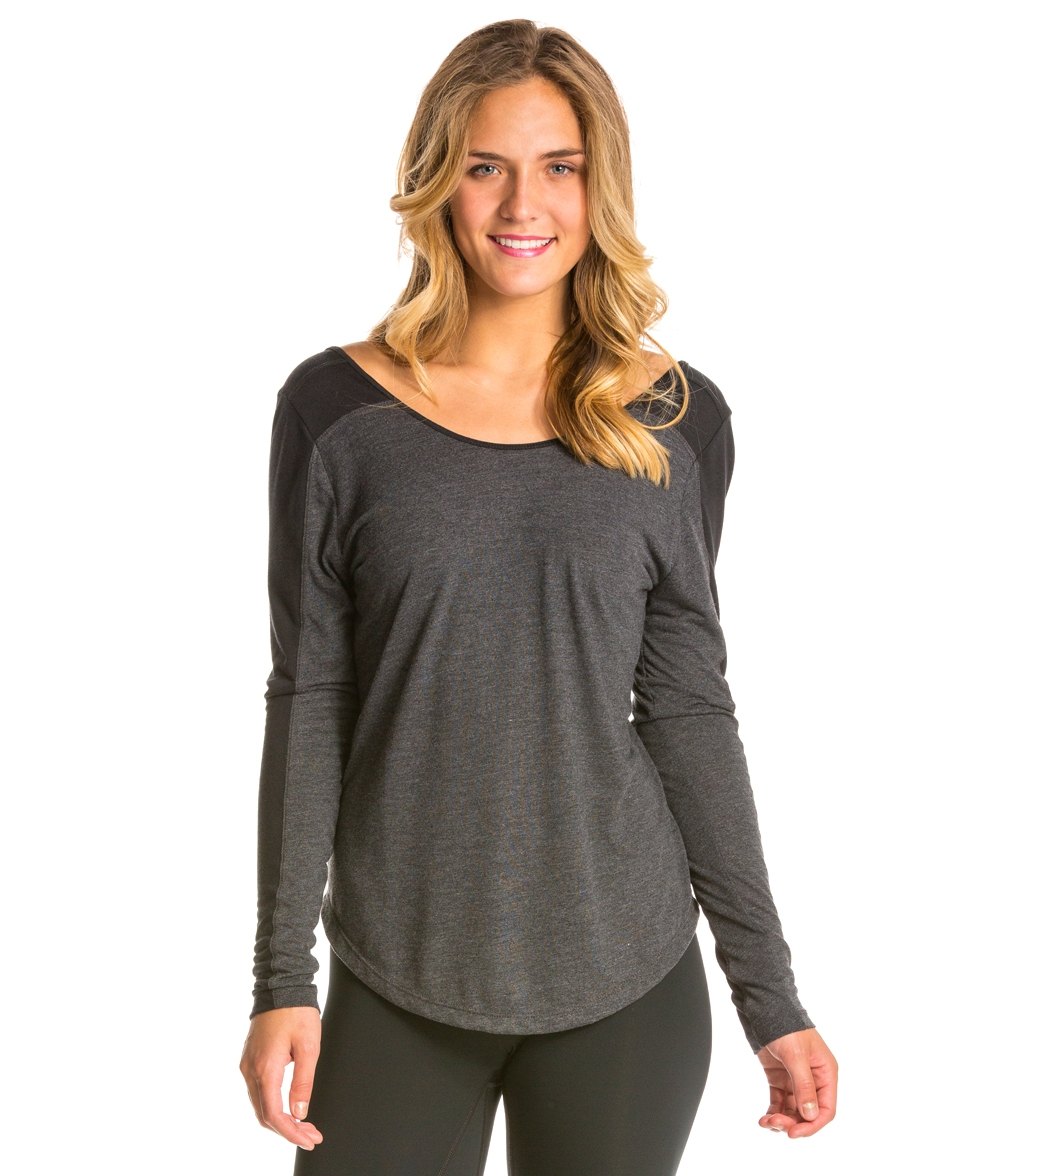 Asics Women's Relaxed Long Sleeve Top - Black Heather/Black Large - Swimoutlet.com